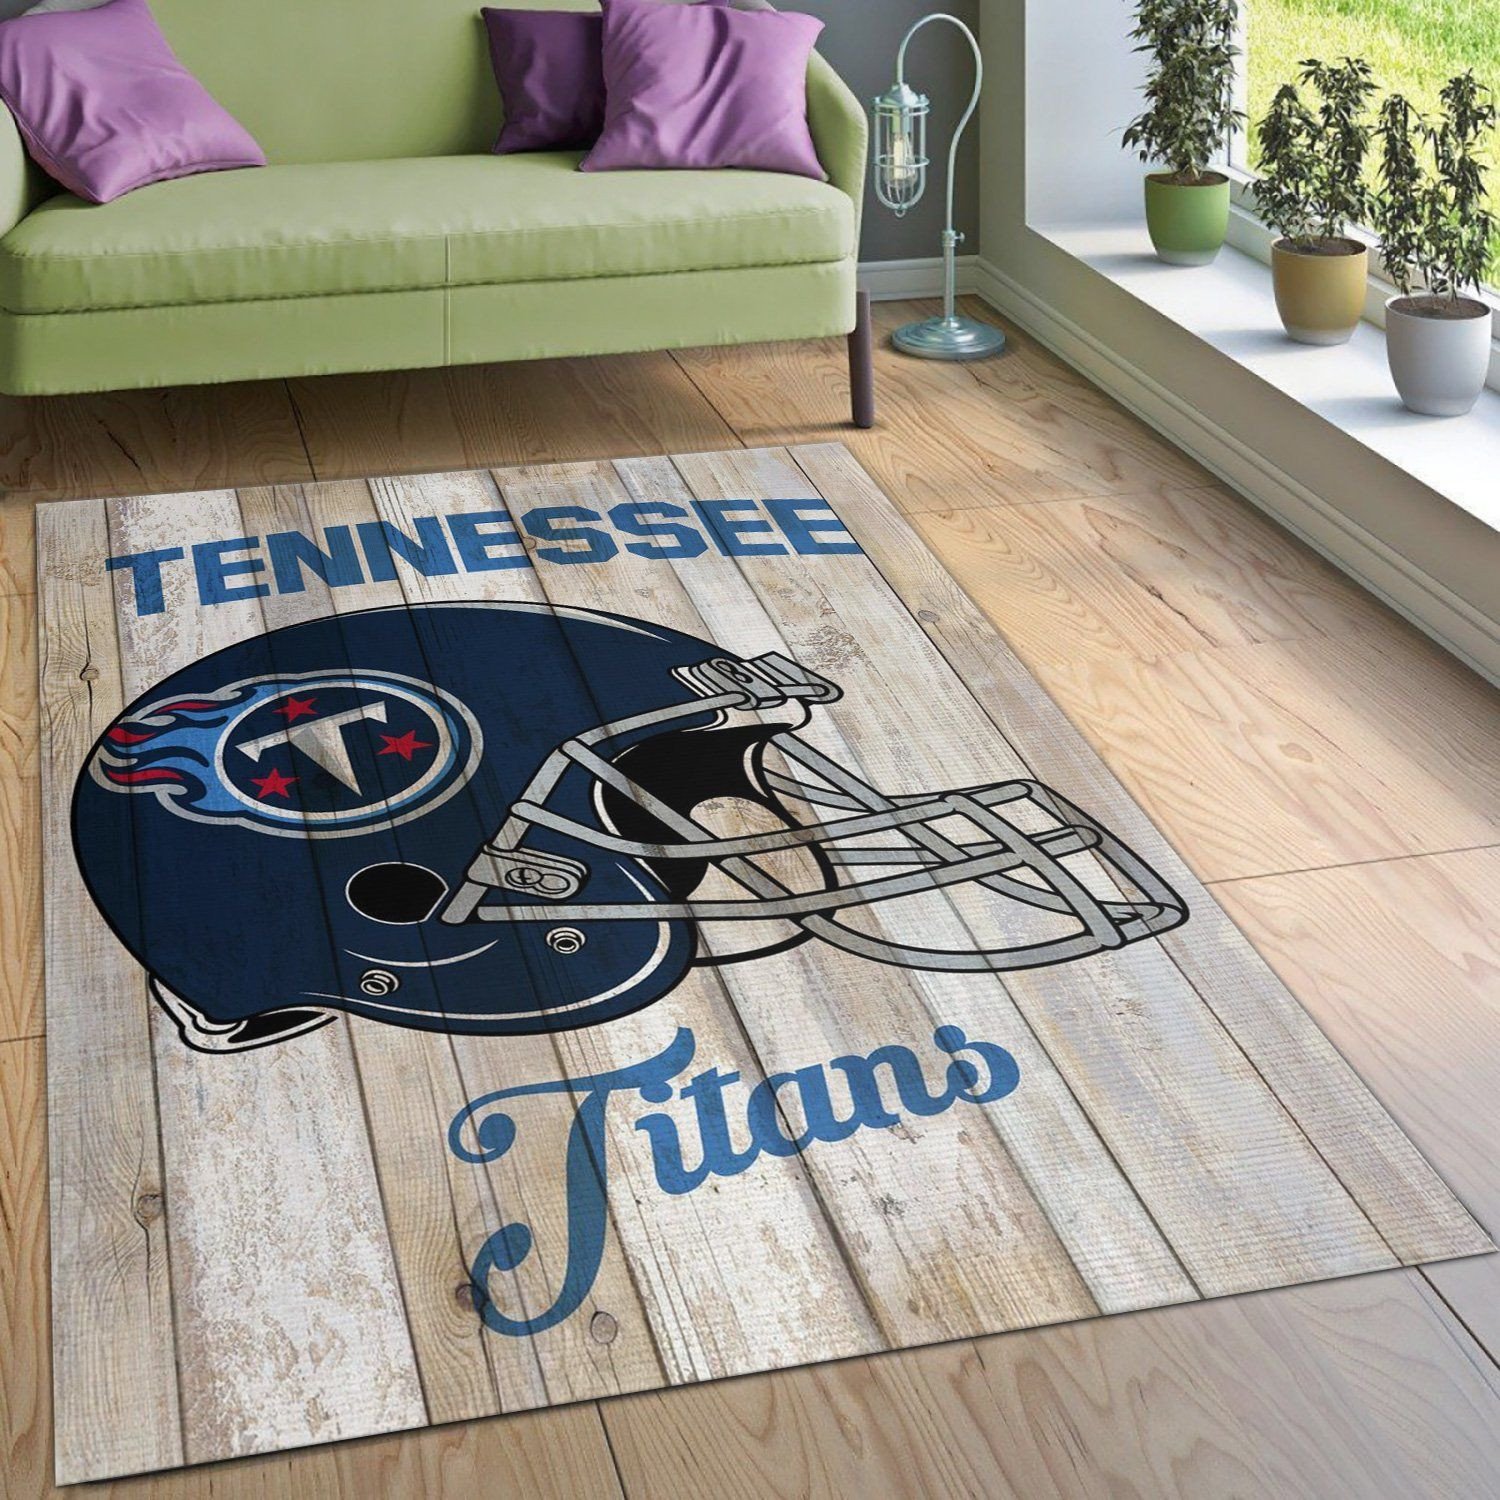 Tennessee Titans Blue Nfl Rug Living Room Rug Home US Decor - Indoor Outdoor Rugs 2